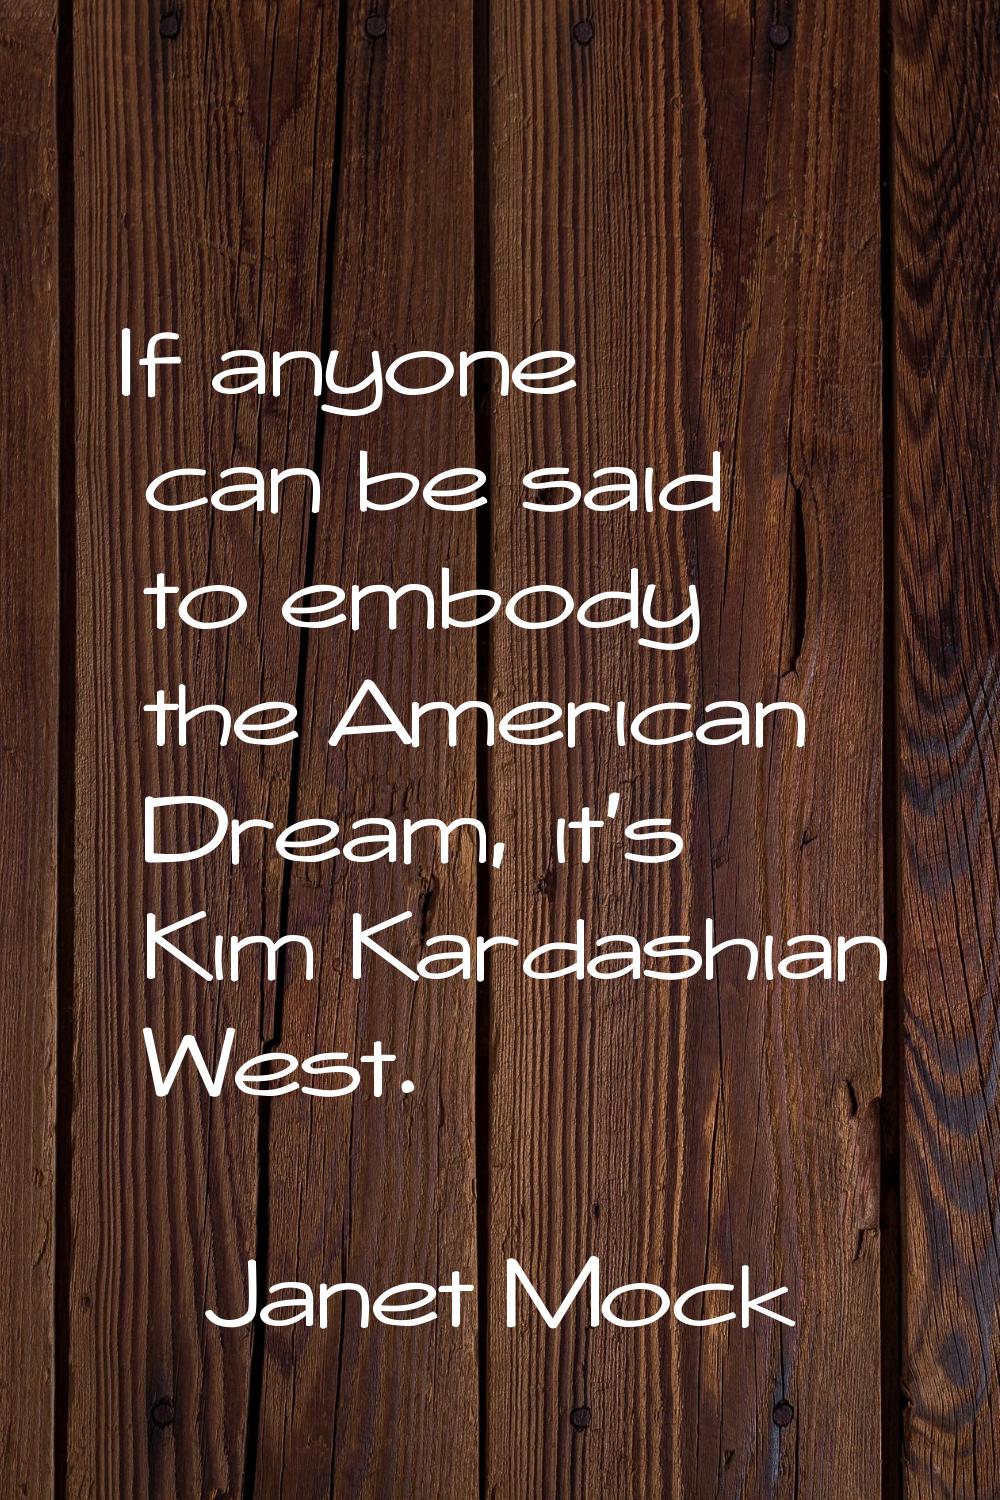 If anyone can be said to embody the American Dream, it's Kim Kardashian West.